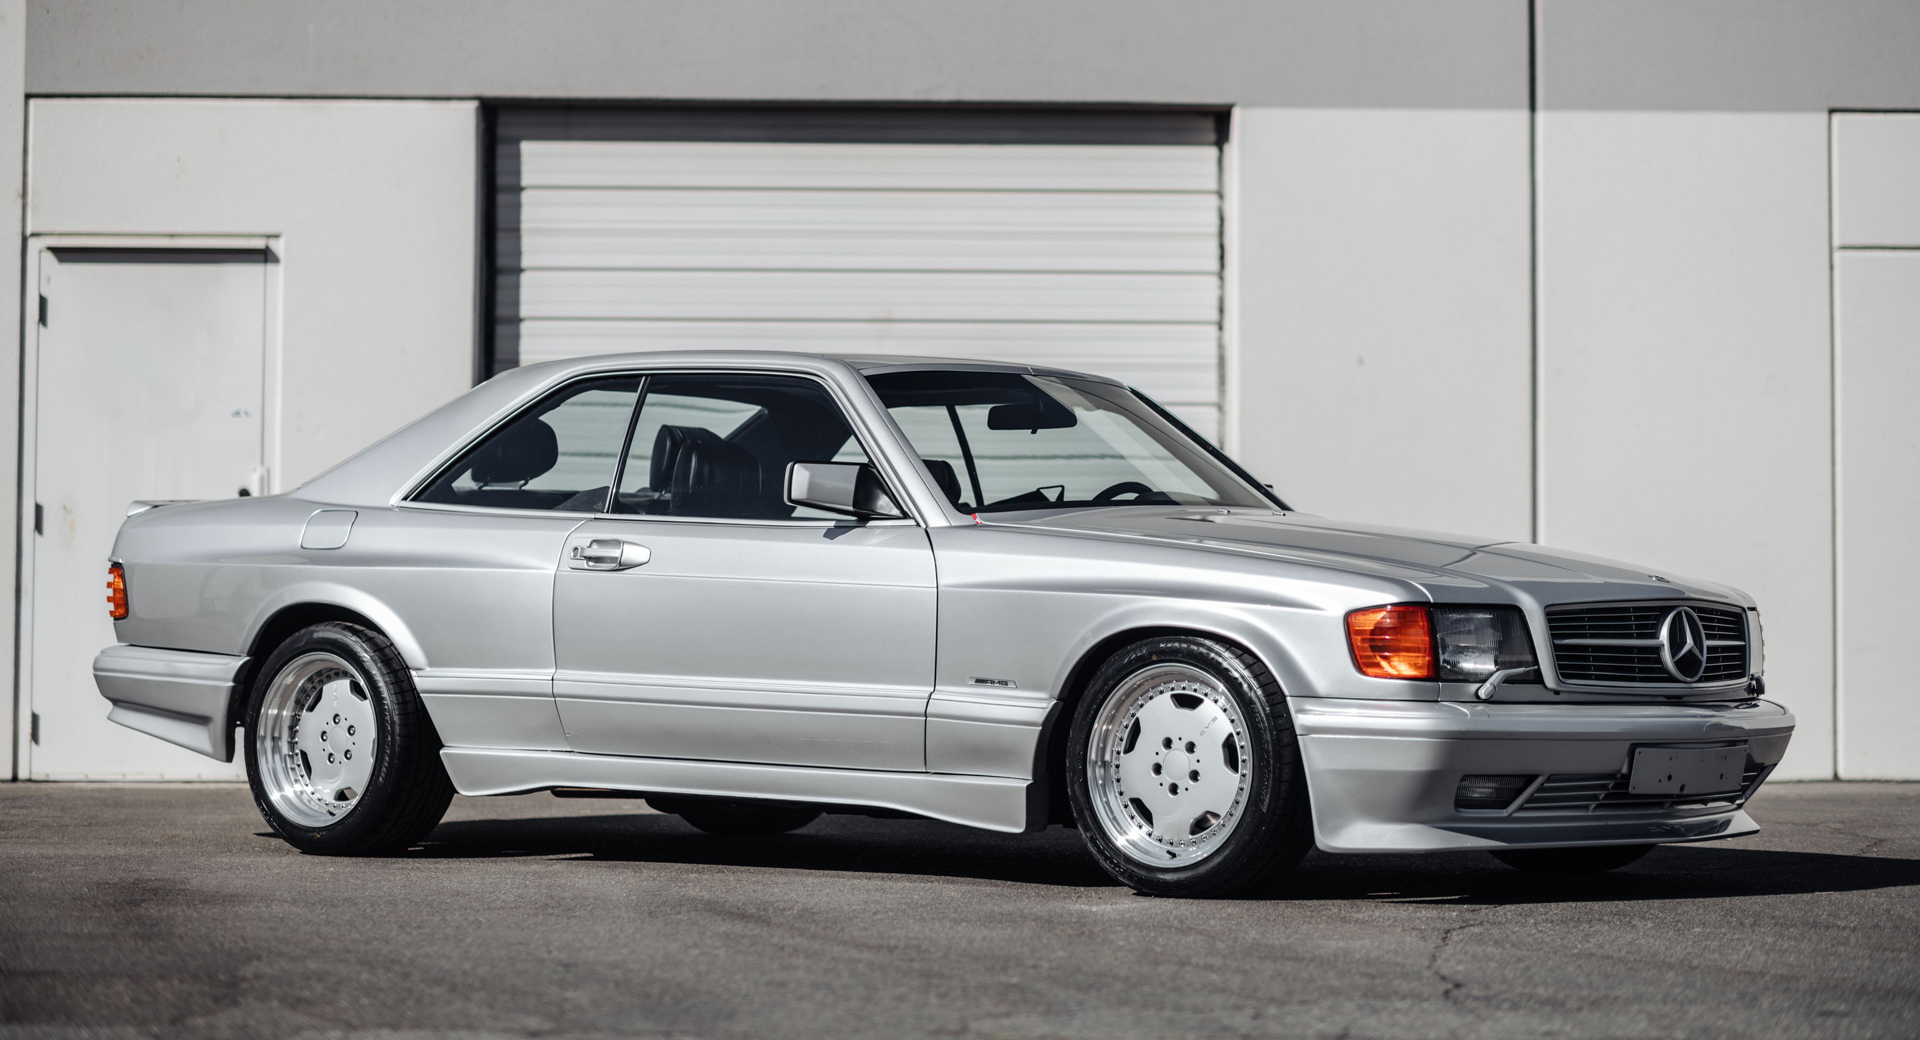 1989 Mercedes Benz 560 SEC AMG 6 0 Widebody Is Bad To The Bone Carscoops